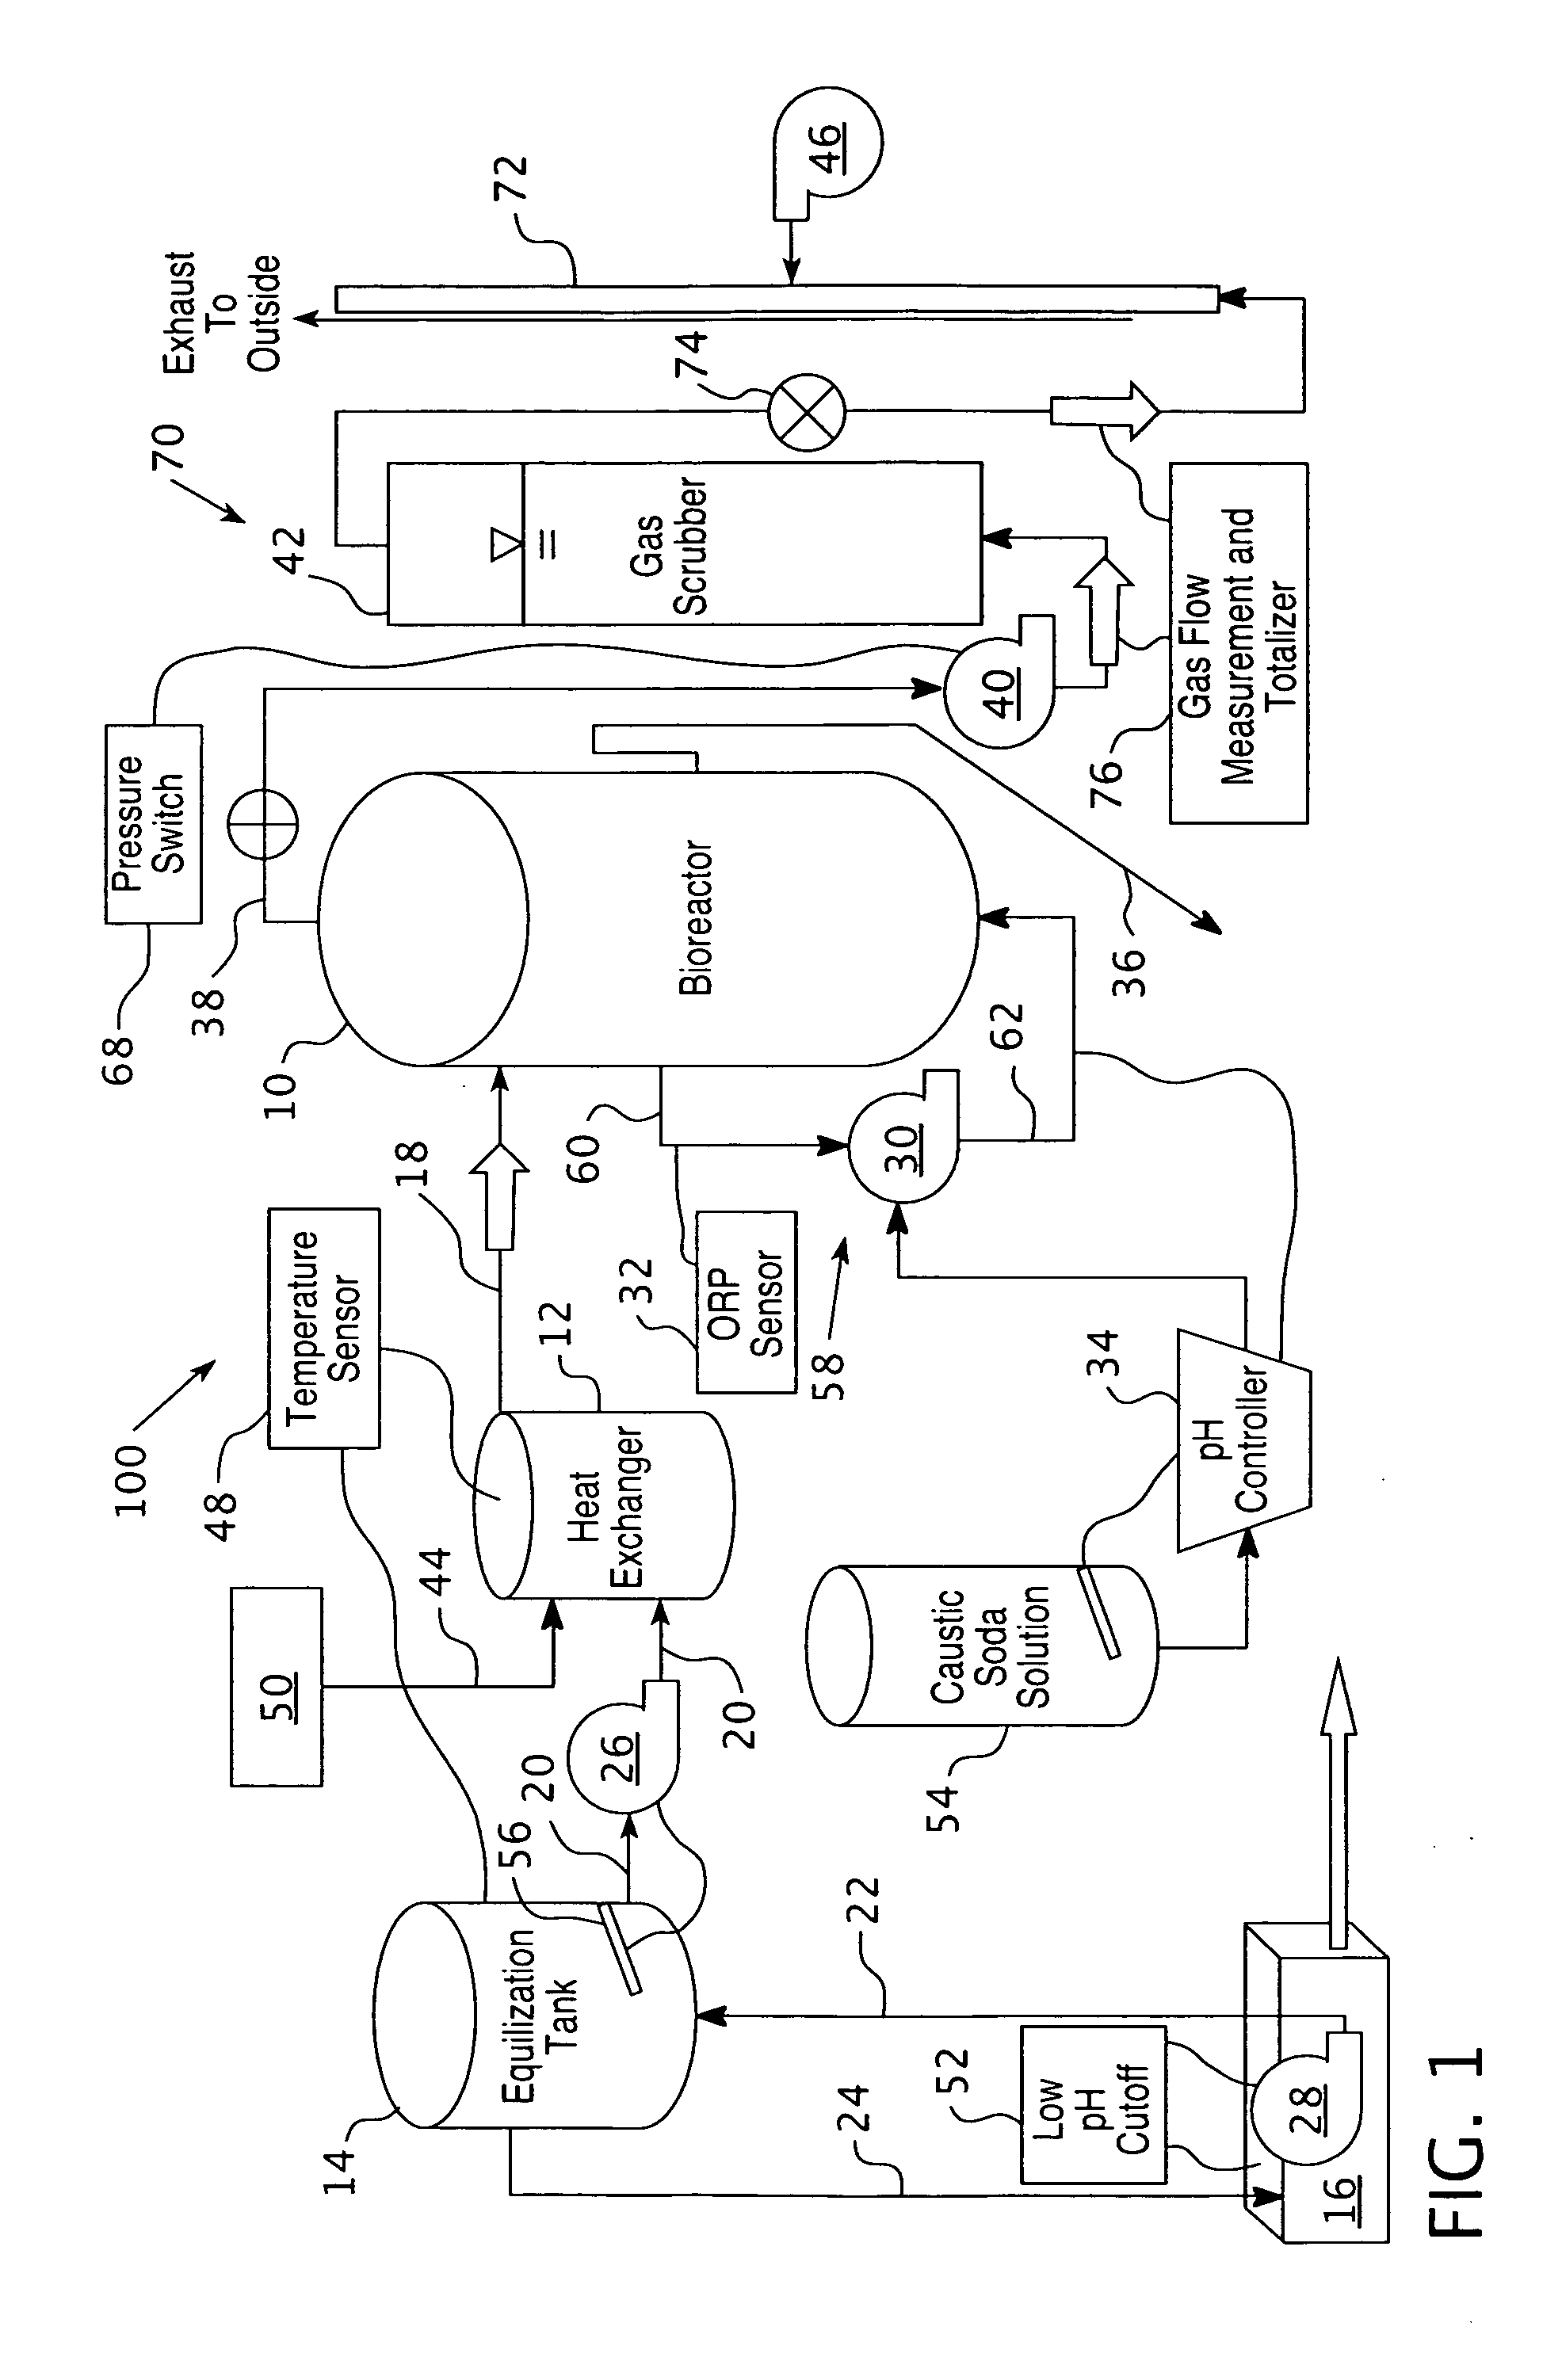 Hydrogen producing apparatus utilizing excess heat from an industrial facility